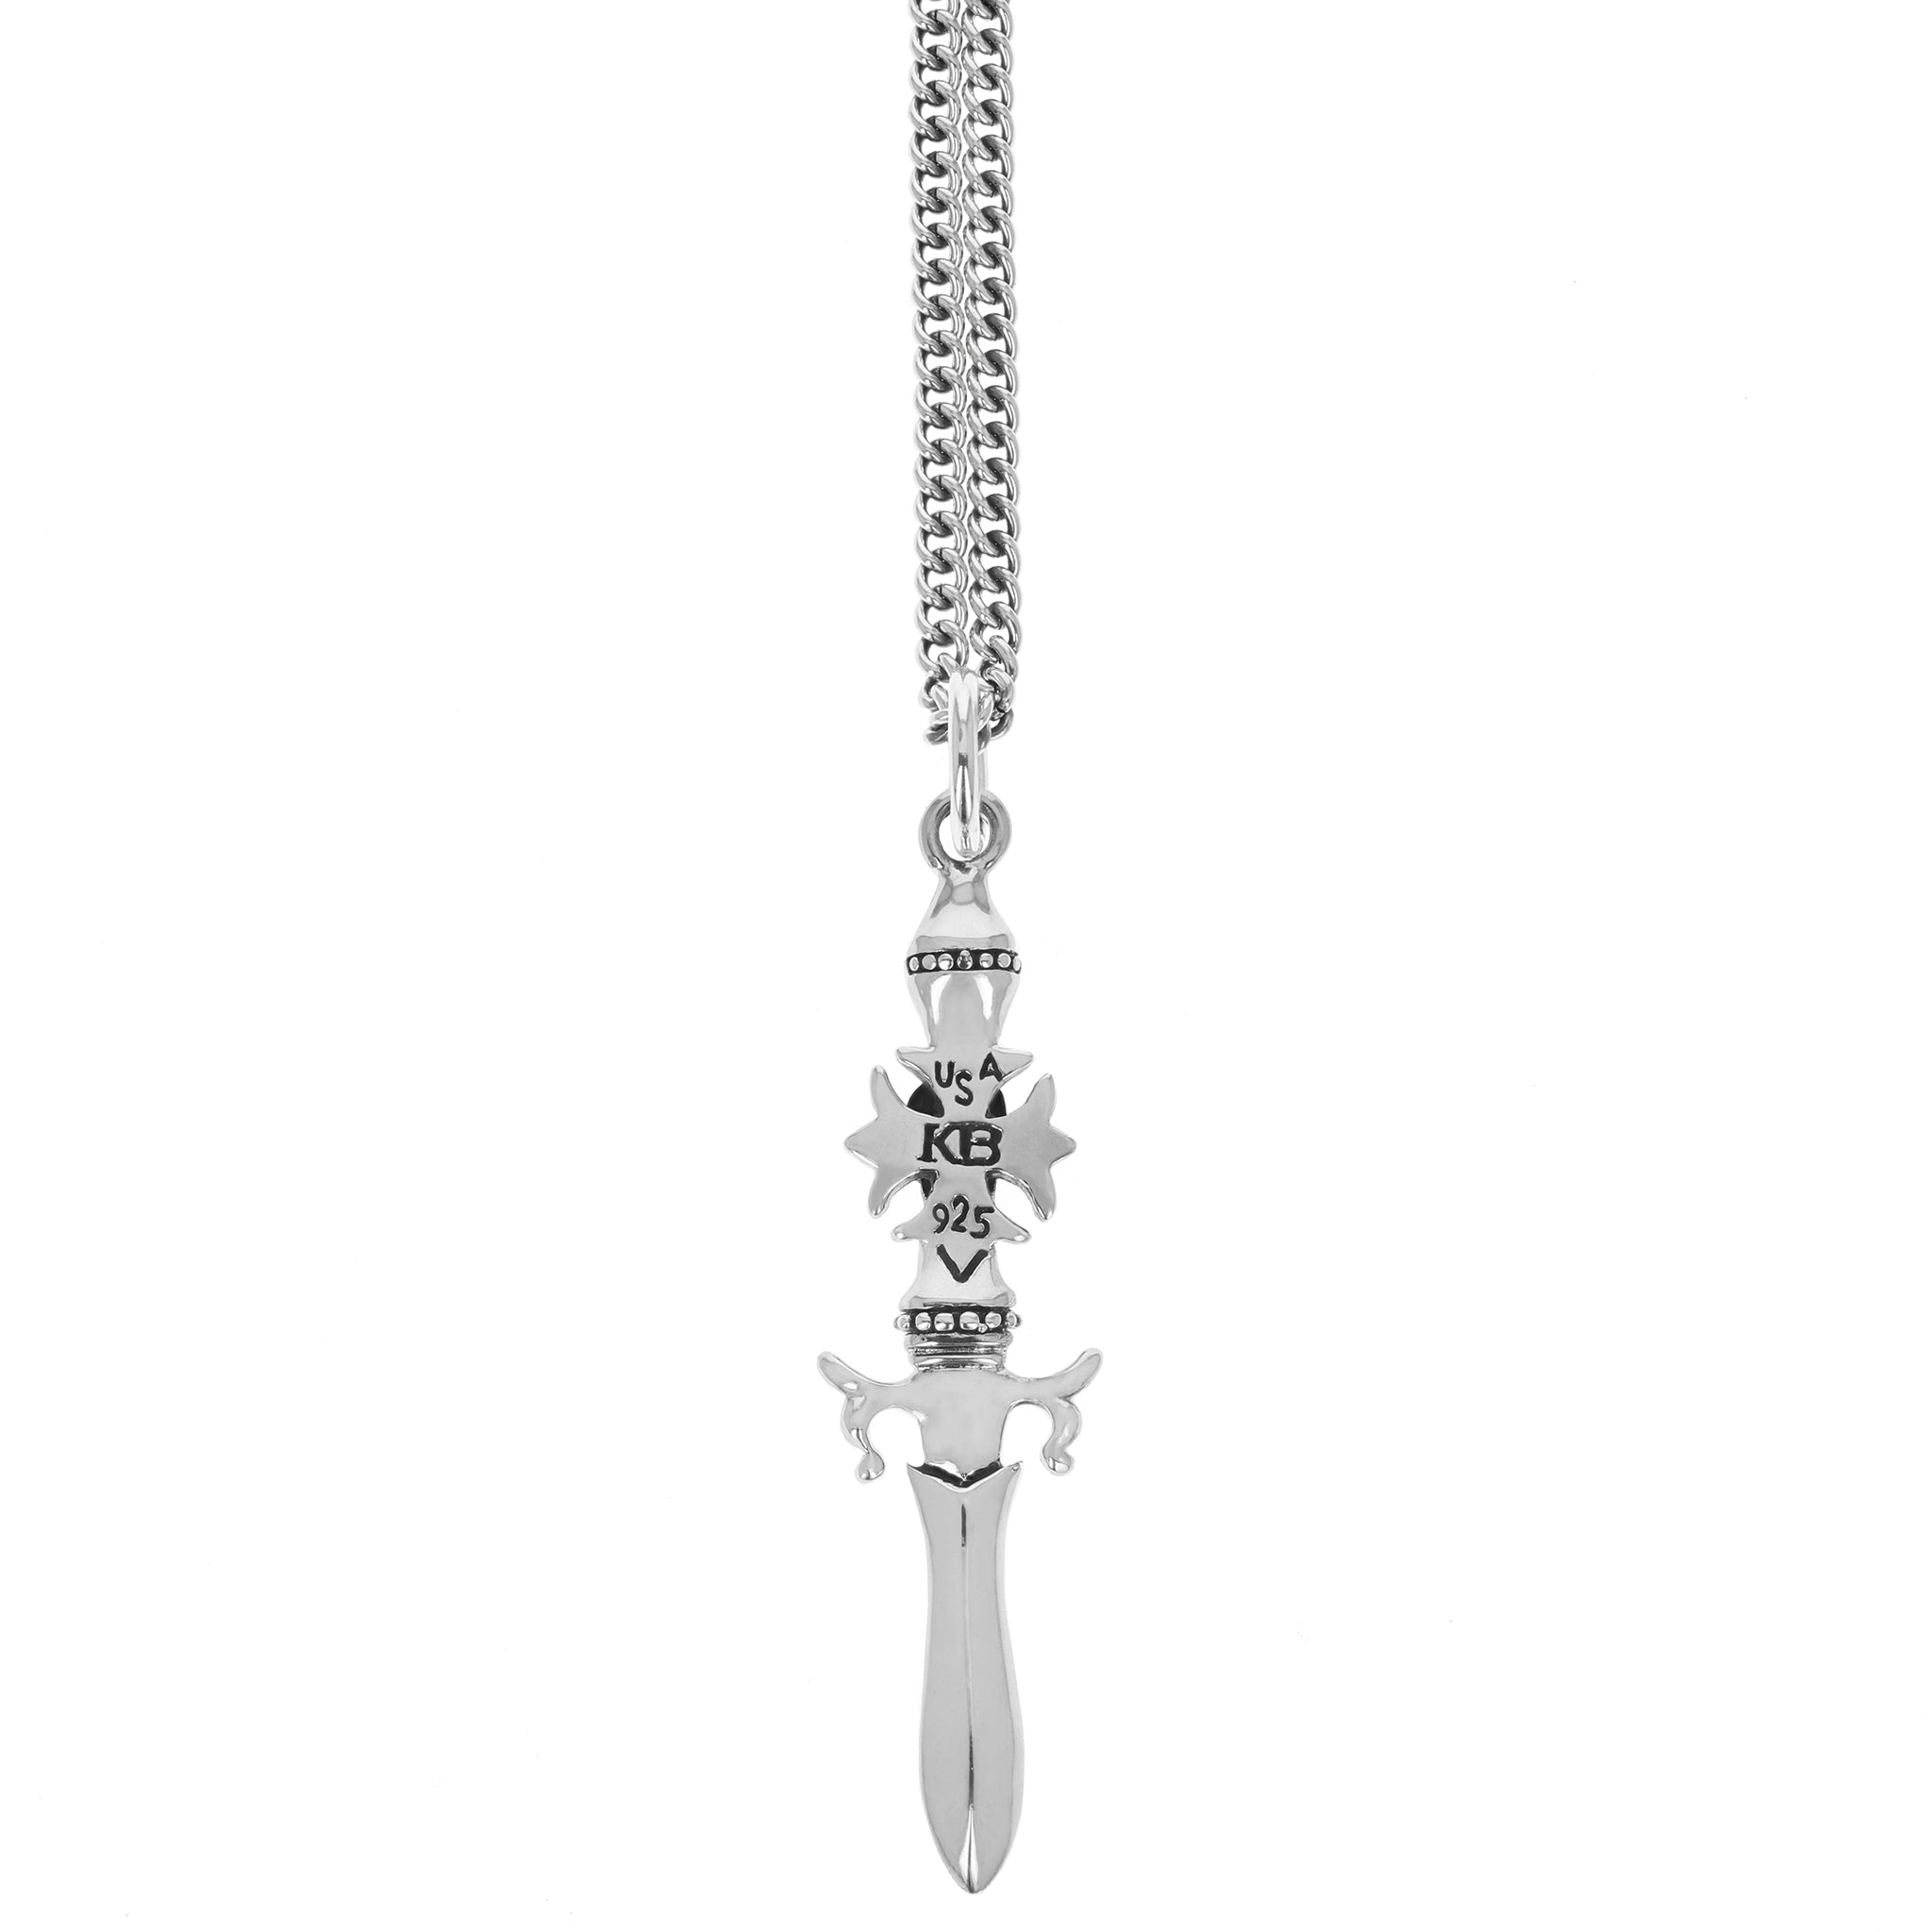 Chrome hearts necklace 60cm paper chain with dagger pendant from David  studio925 : r/QualityReps